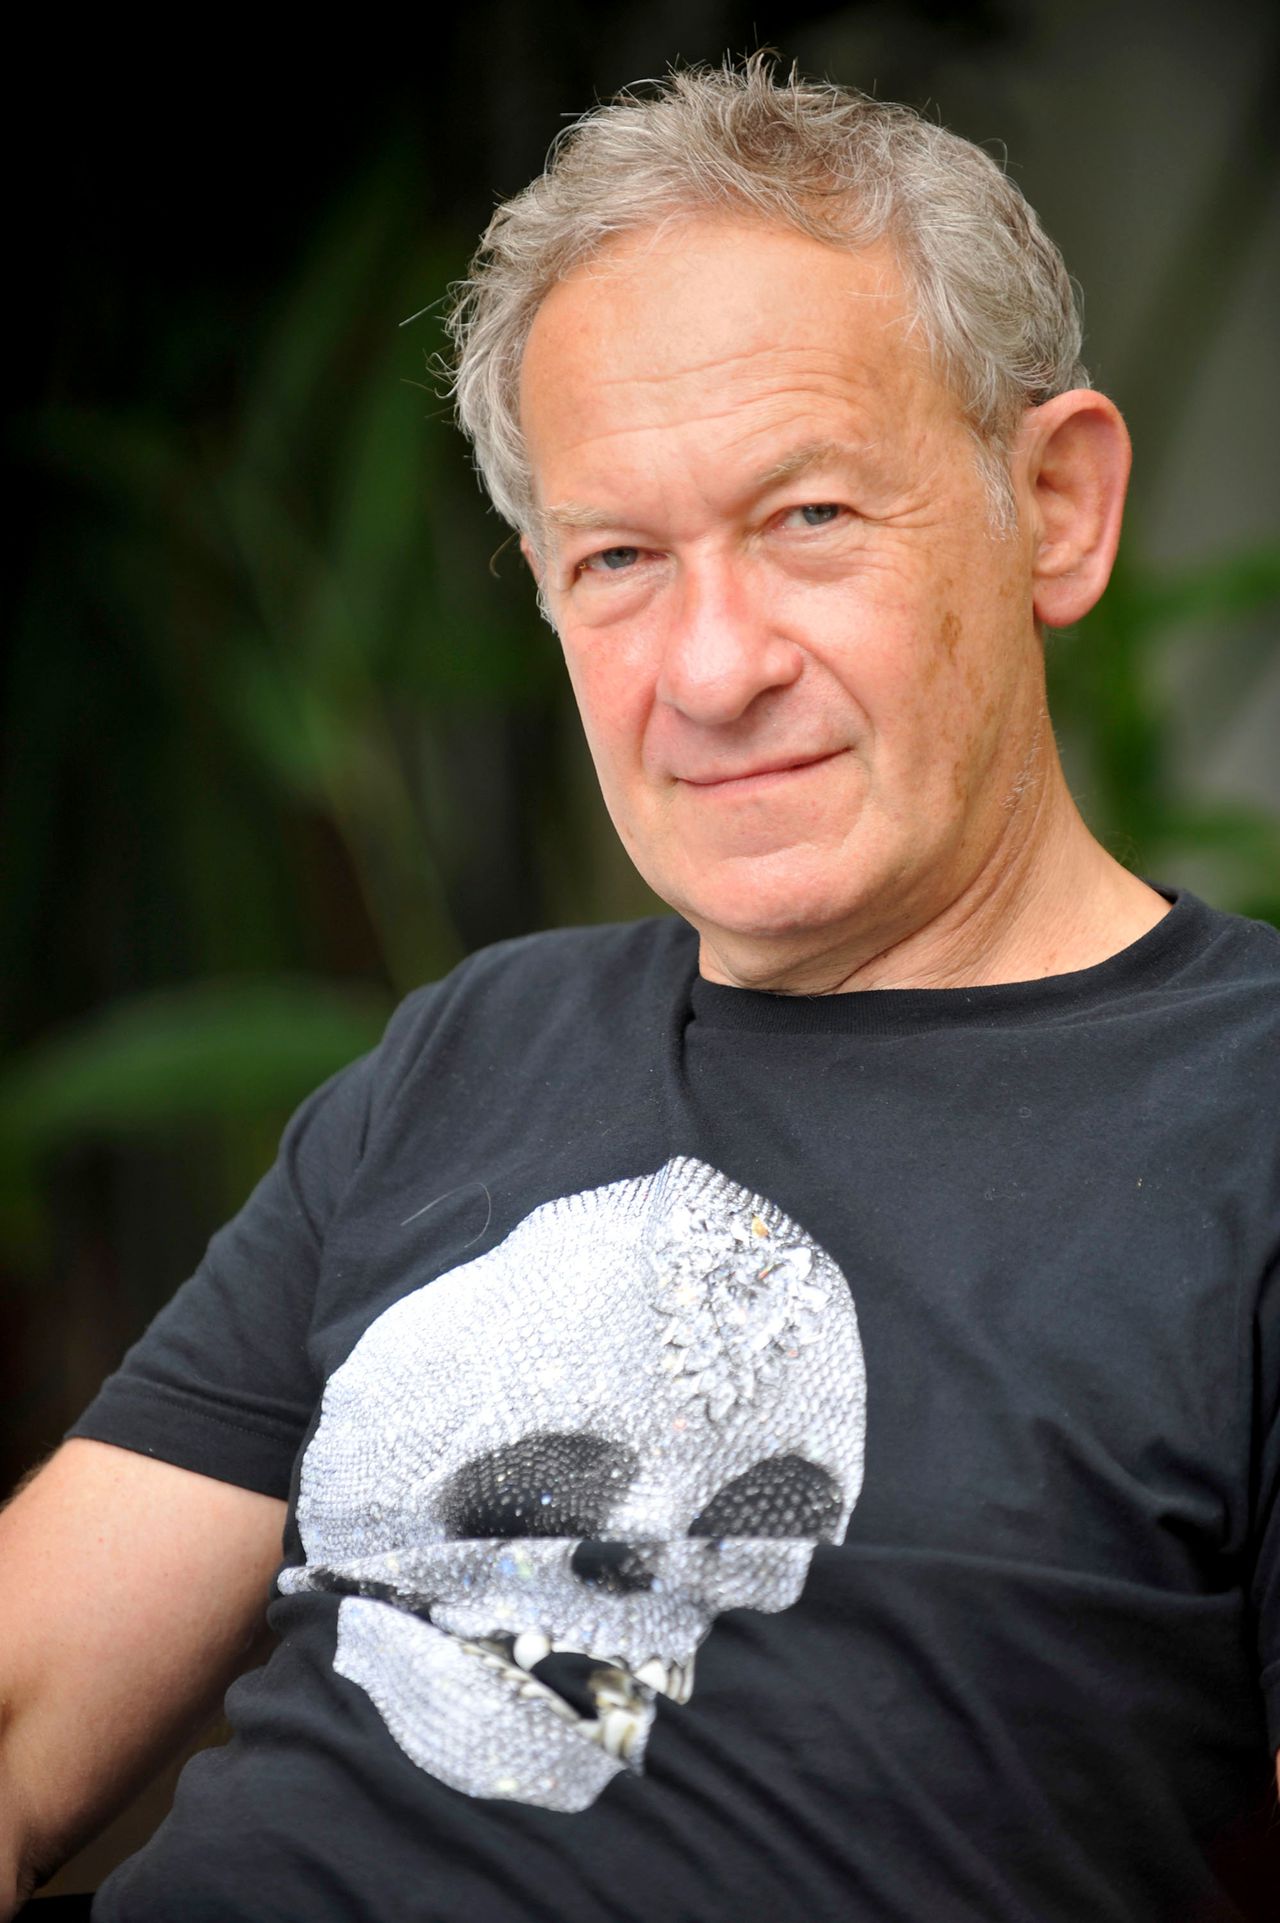 PARATY, BRAZIL - JULY 05: British historian Simon Schama poses for a portrait during the Paraty International Literary Festival on July 5, 2009 in Paraty, Brazil. (Photo by Luciana Whitaker/LatinContent/Getty Images)